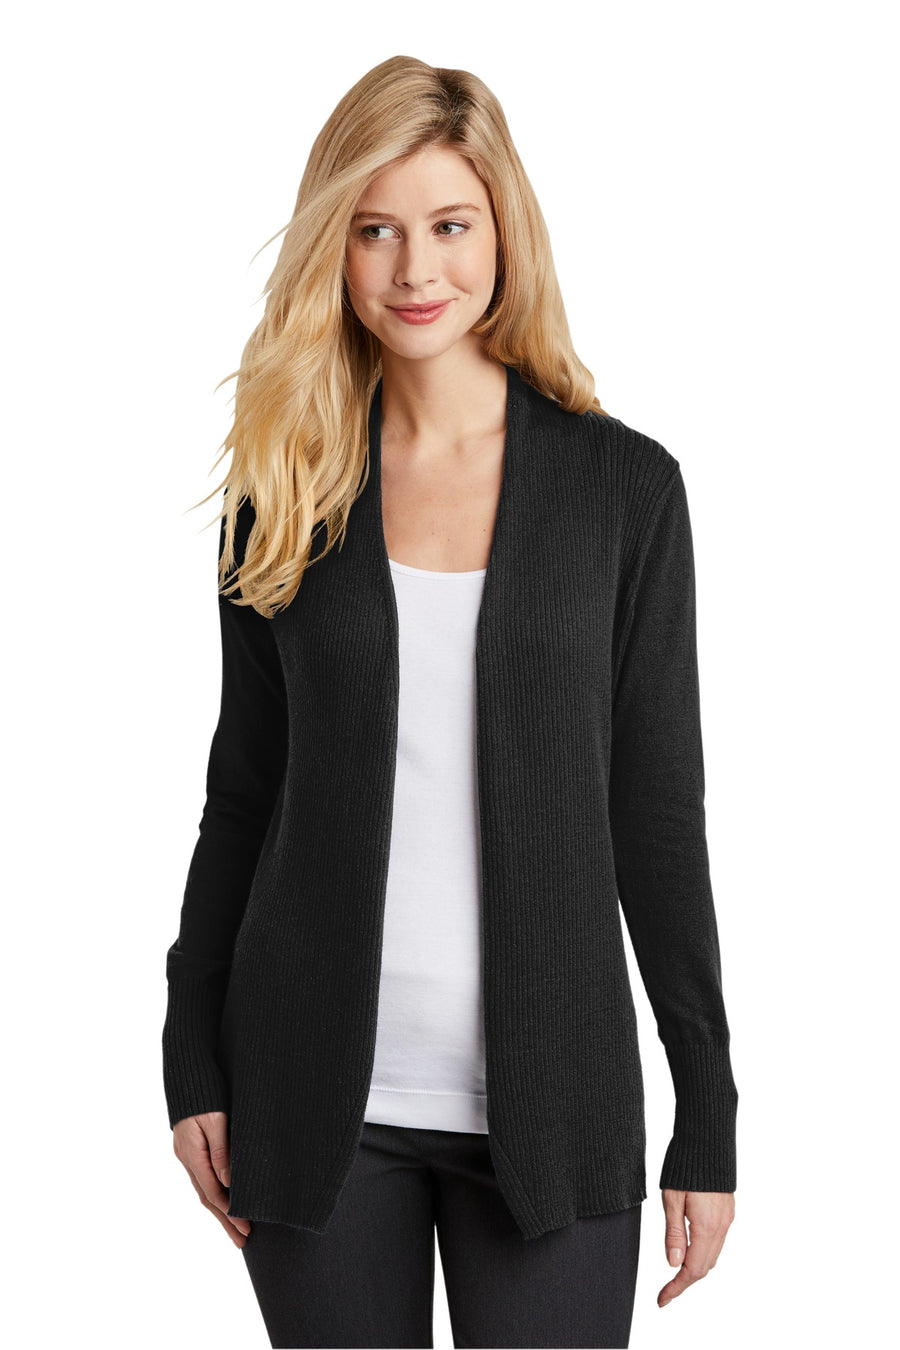 Port Authority Open Front Cardigan Sweater.